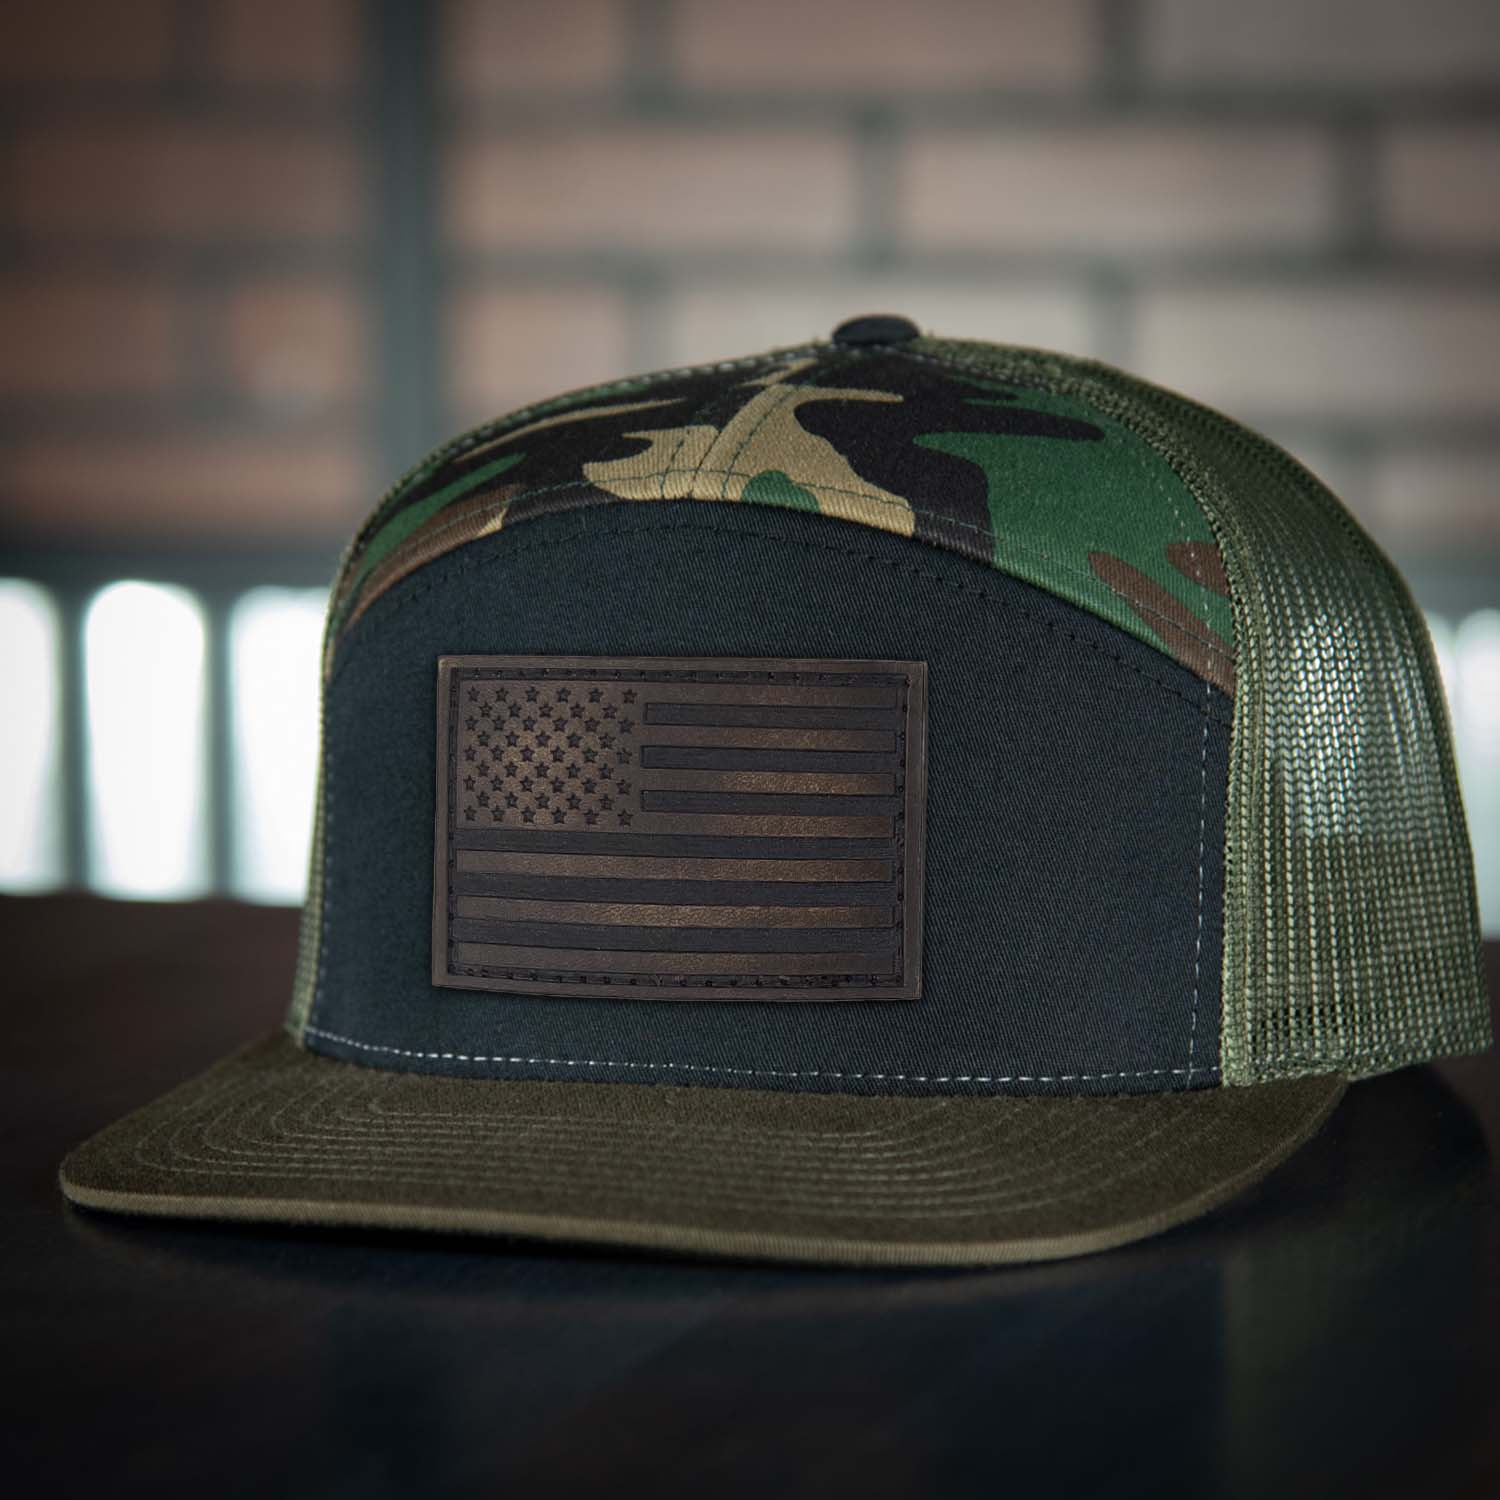 Revolution Mfg full grain leather American flag patch on a 7 panel trucker hat in woodland with a black front panel and loden mesh